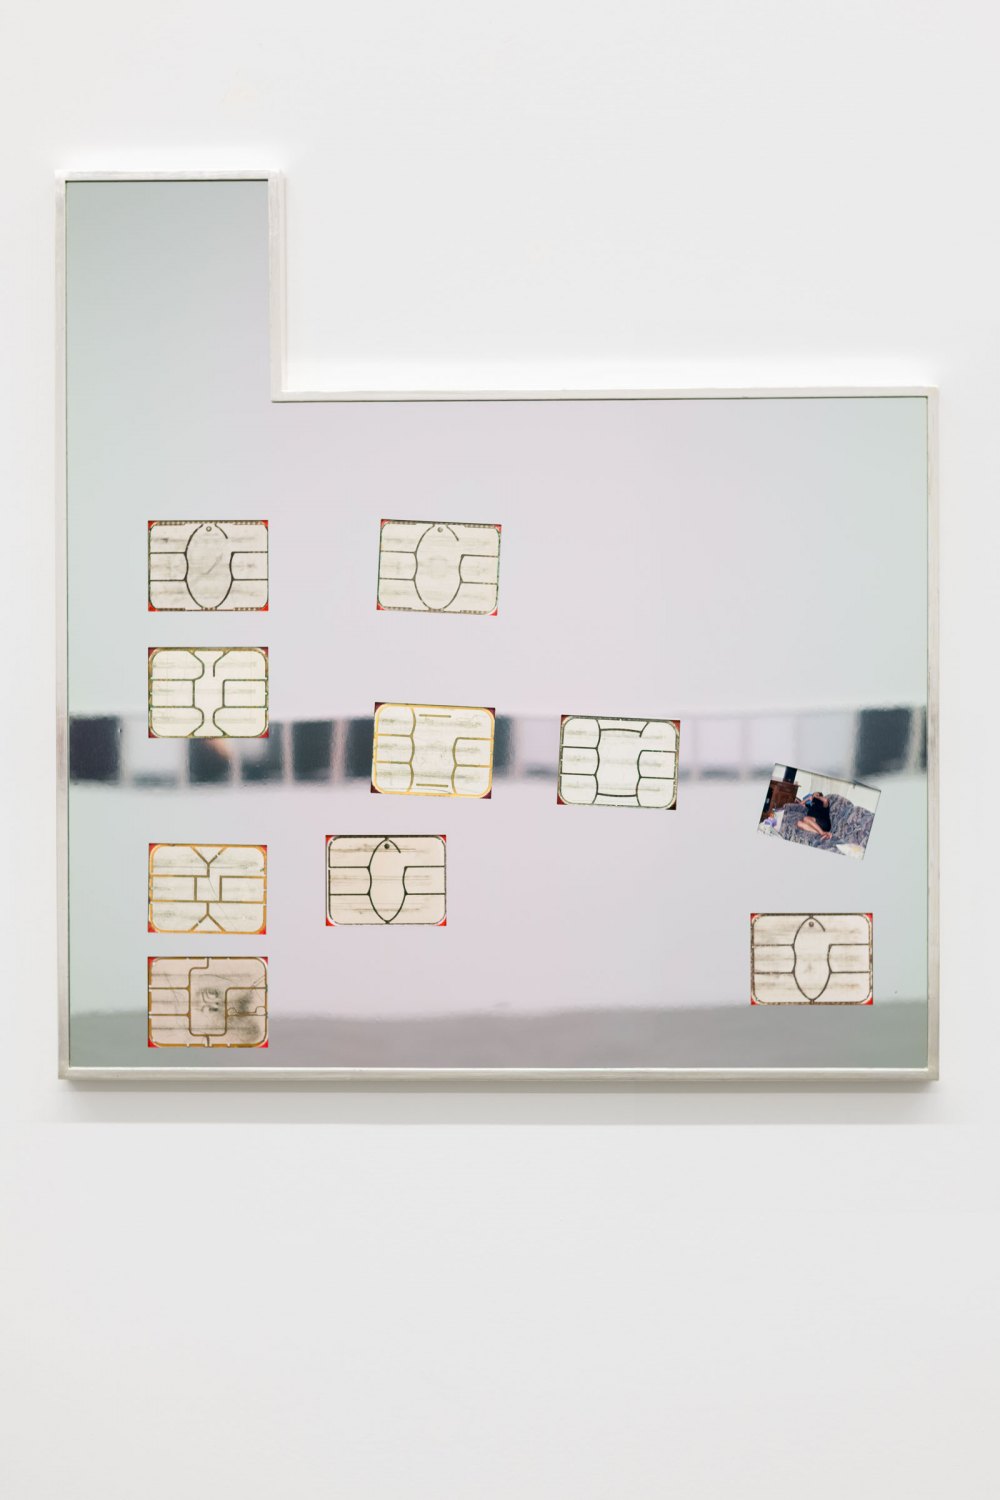 Flagged Identity (5), 2021 Archival pigment prints of my active and inactivebank cards chips, found photo, mirror polished aluminum, and white gold leafed frame 126 x 121.5 x 6 cm